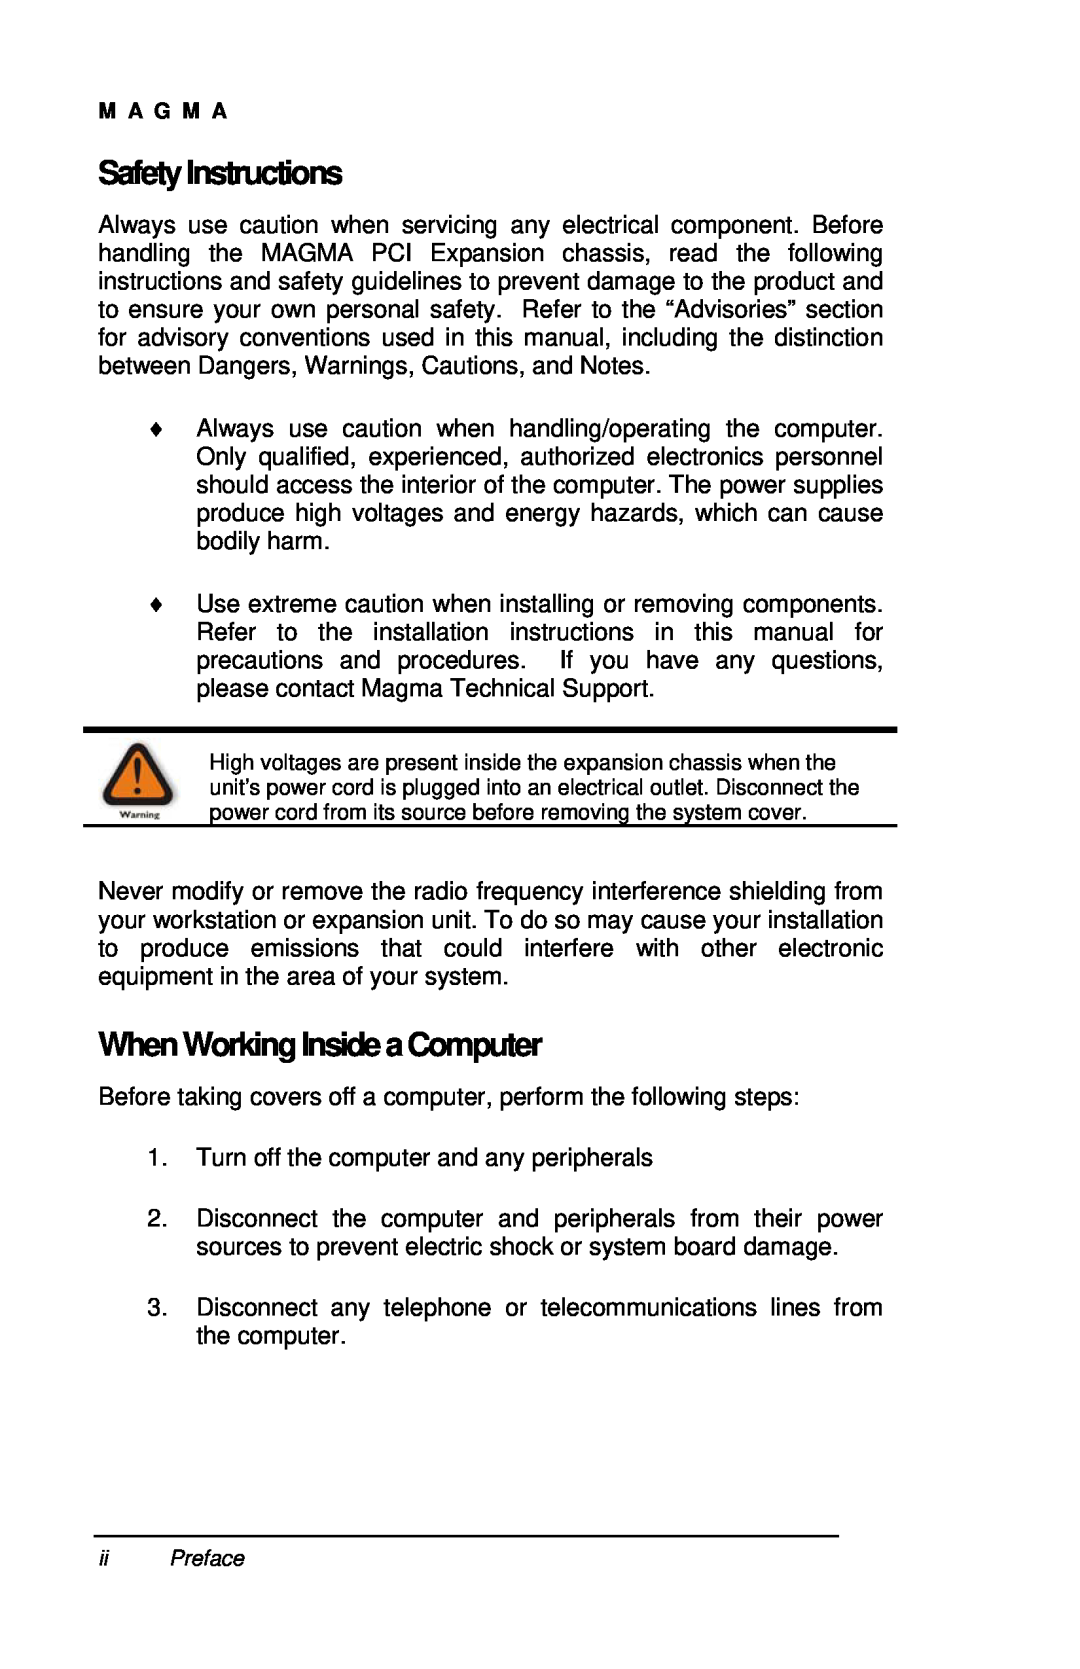 Magma P13RR-TEL user manual SafetyInstructions, WhenWorkingInsideaComputer 